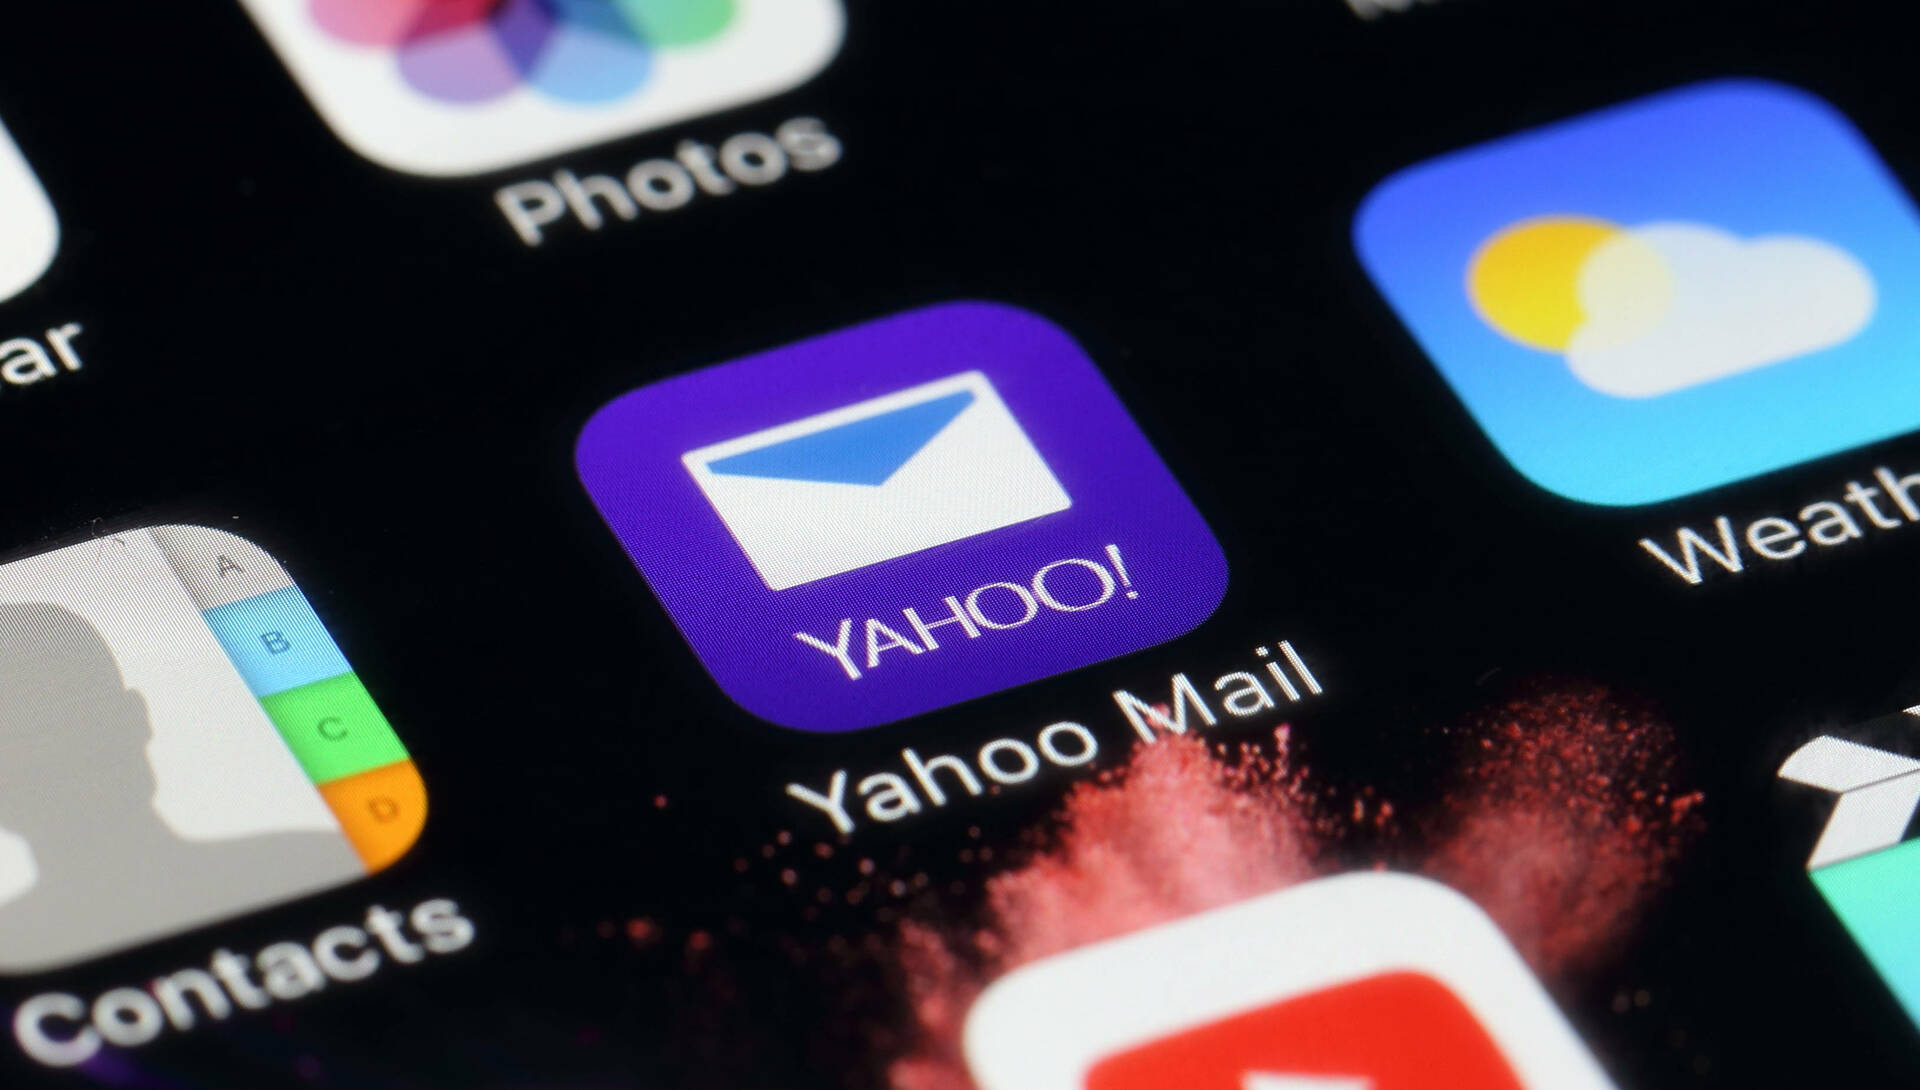 how-to-block-emails-on-yahoo-mobile-app-on-iphone